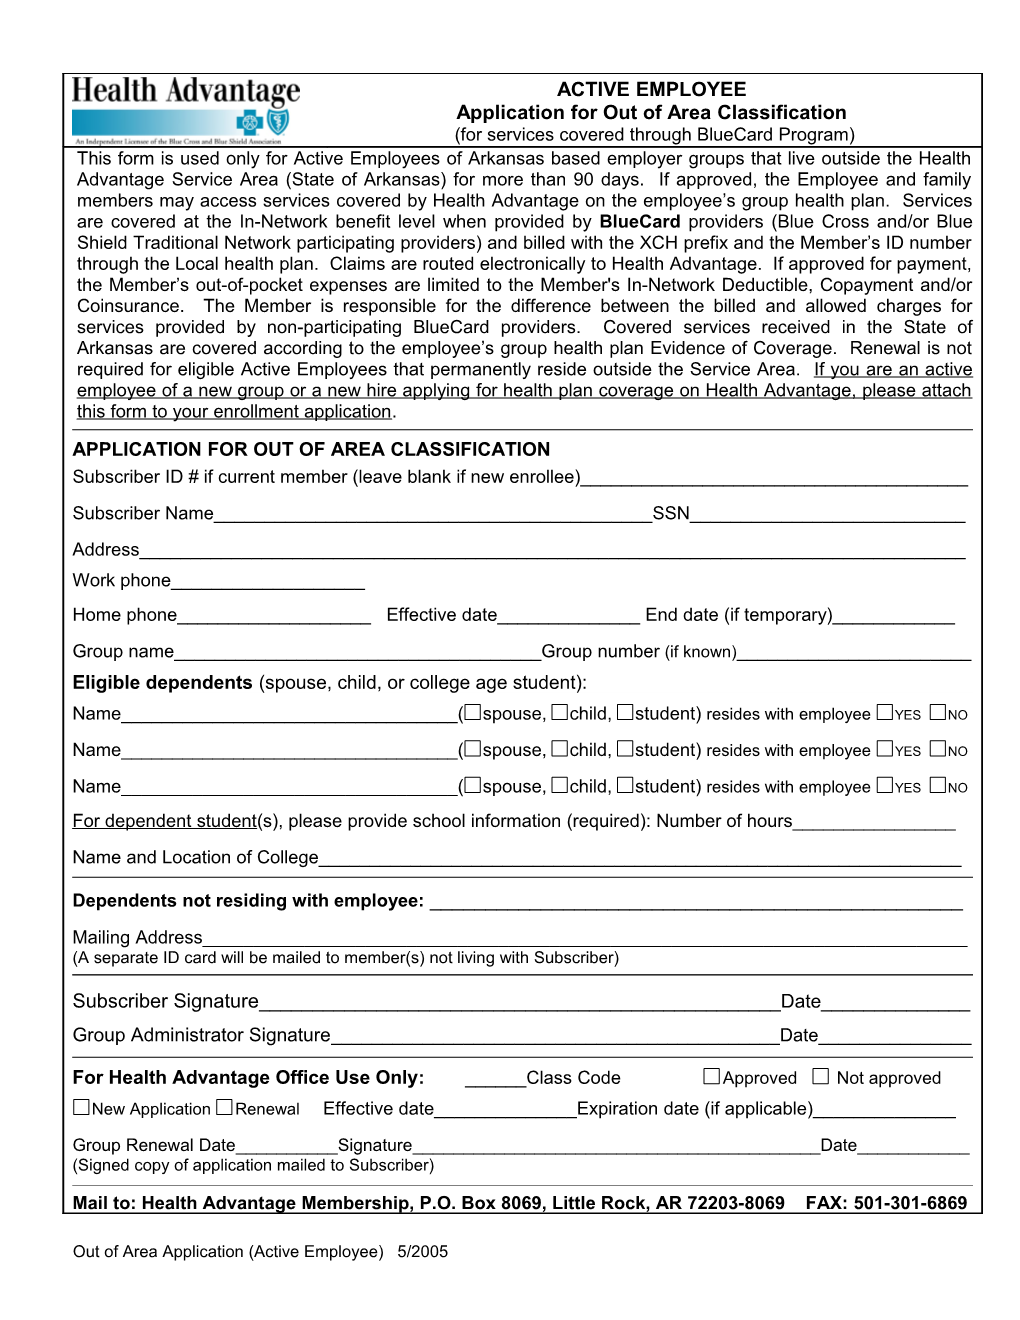 Application for out of Area Classification